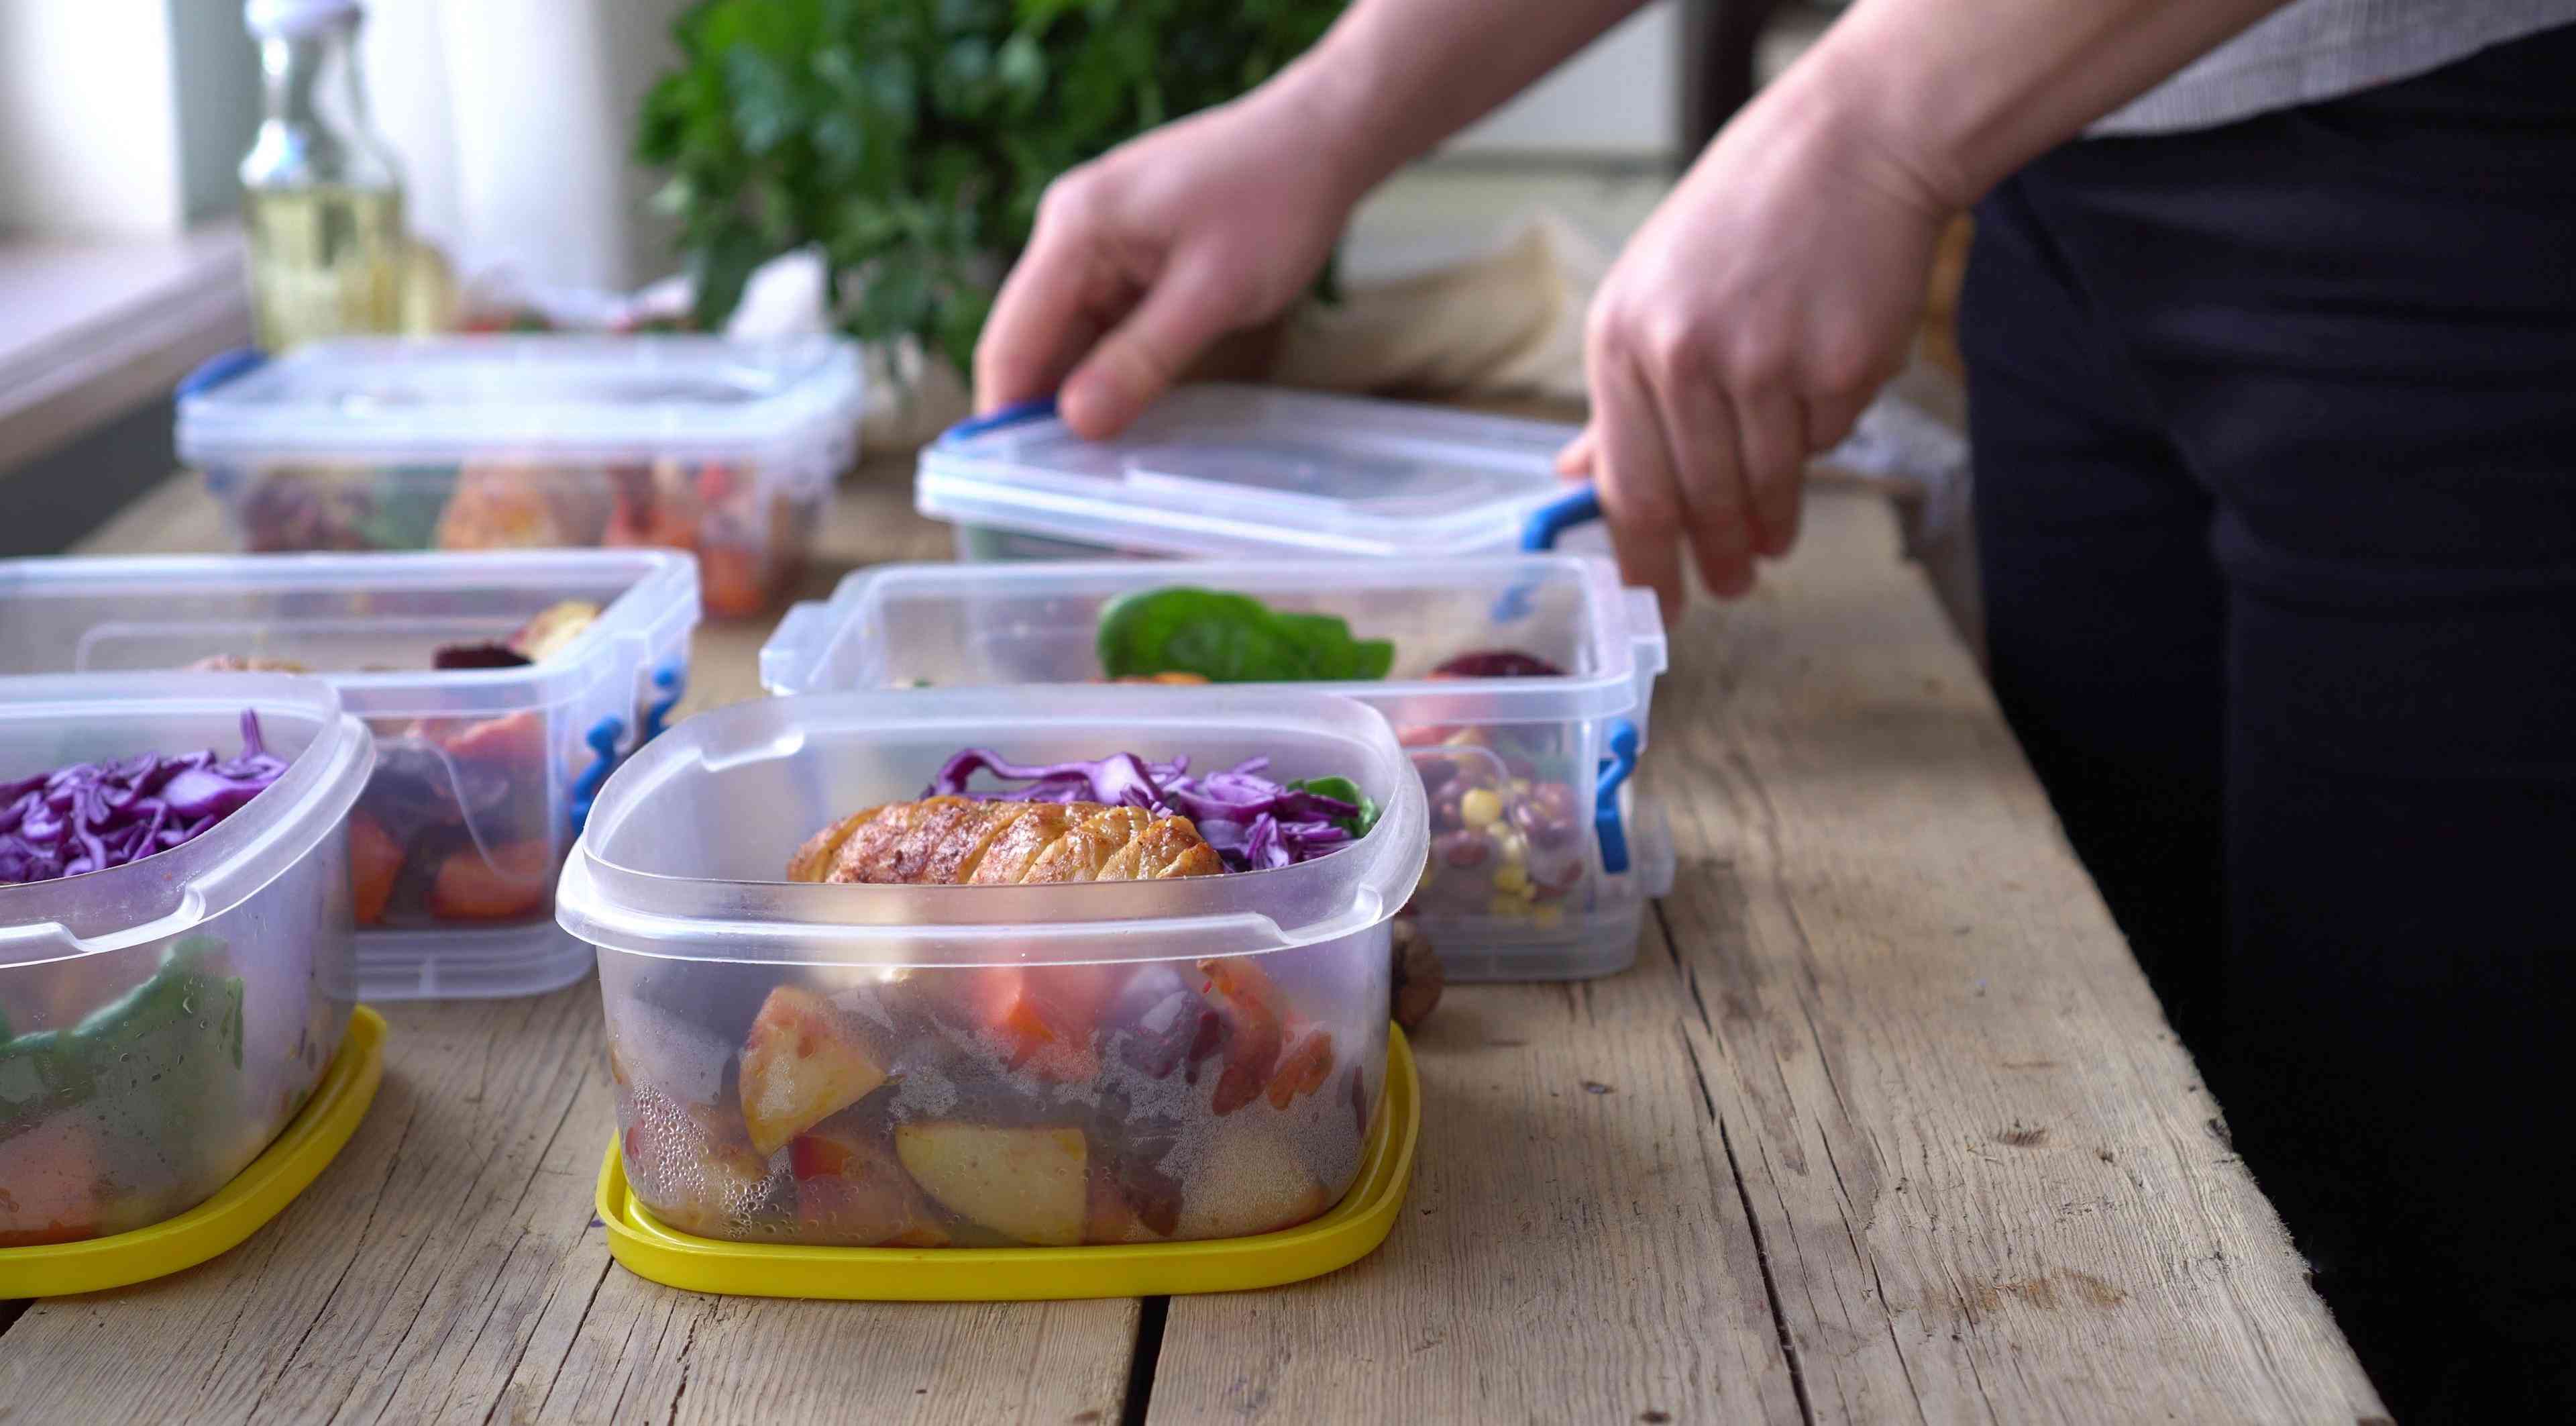 Meal Prep Containers: Benefits and Tips for Getting Started